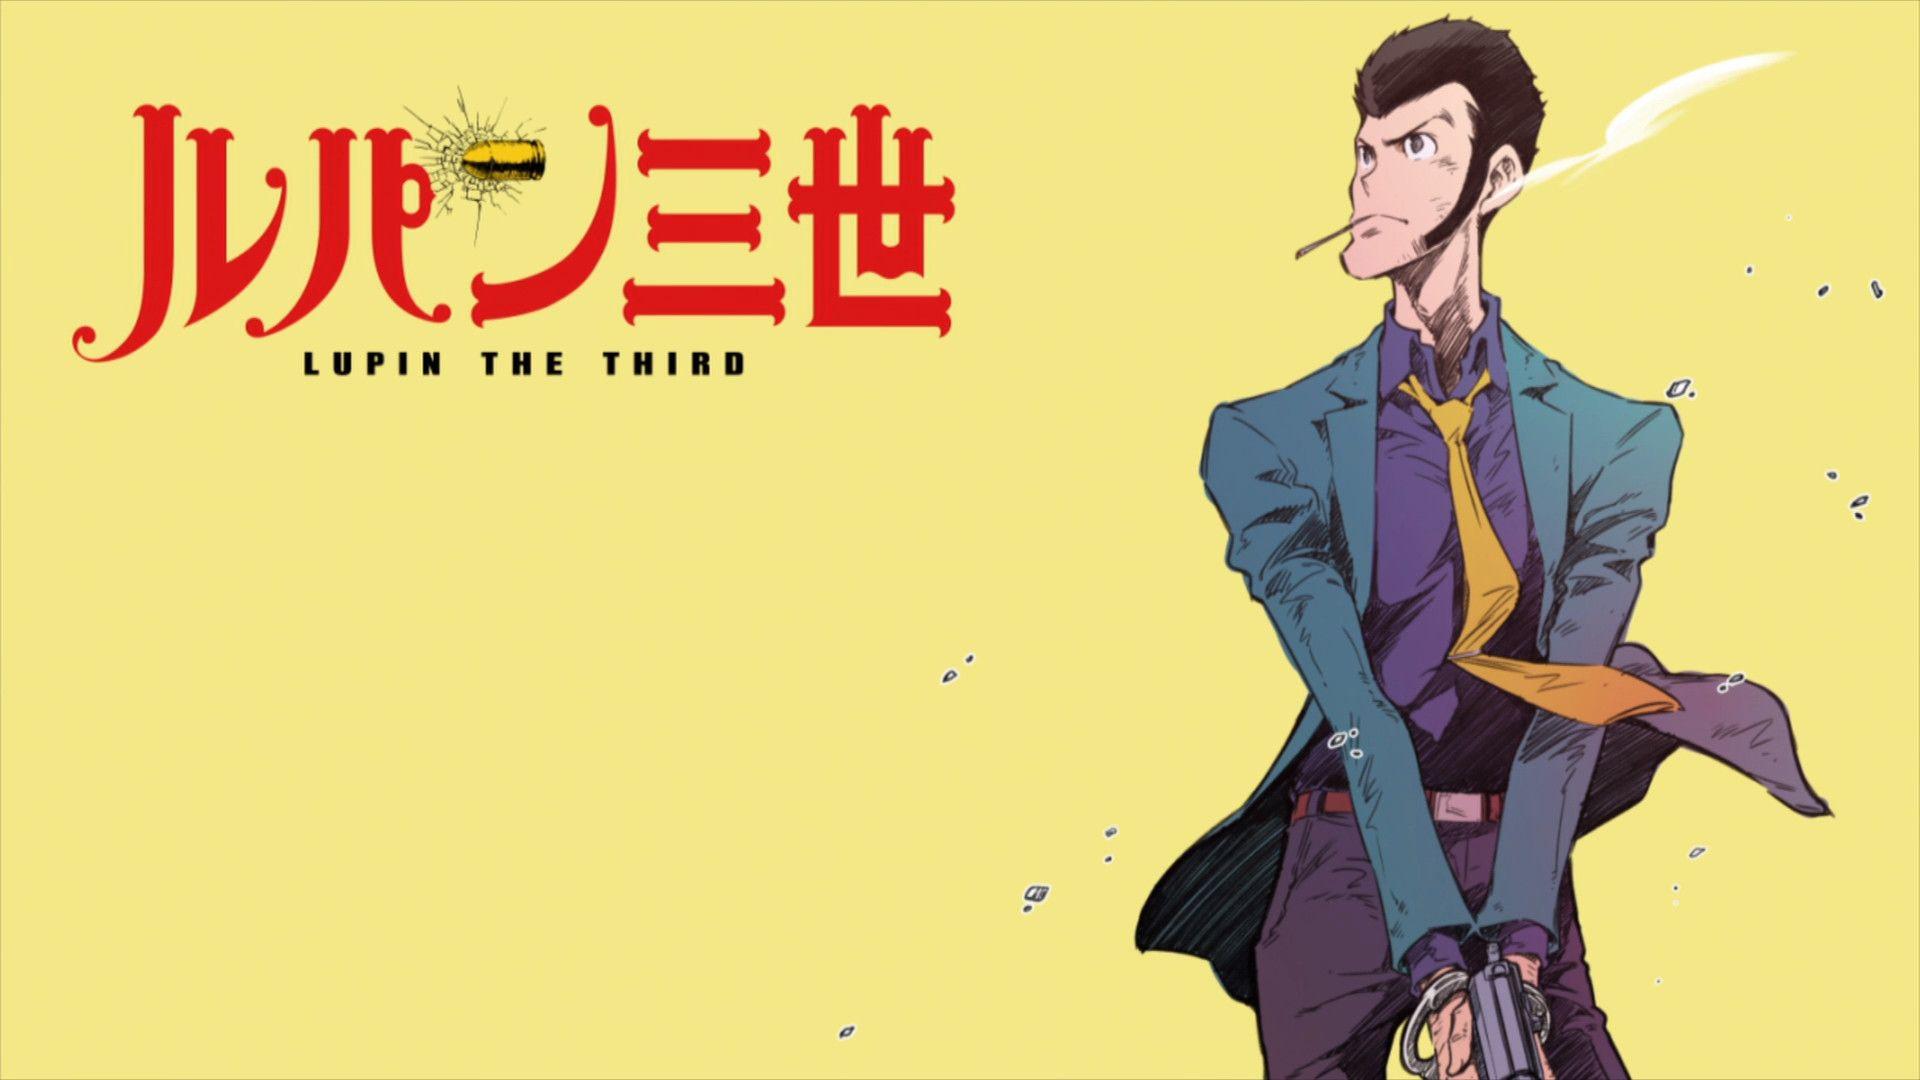 HD wallpaper Anime Lupin The Third  Wallpaper Flare